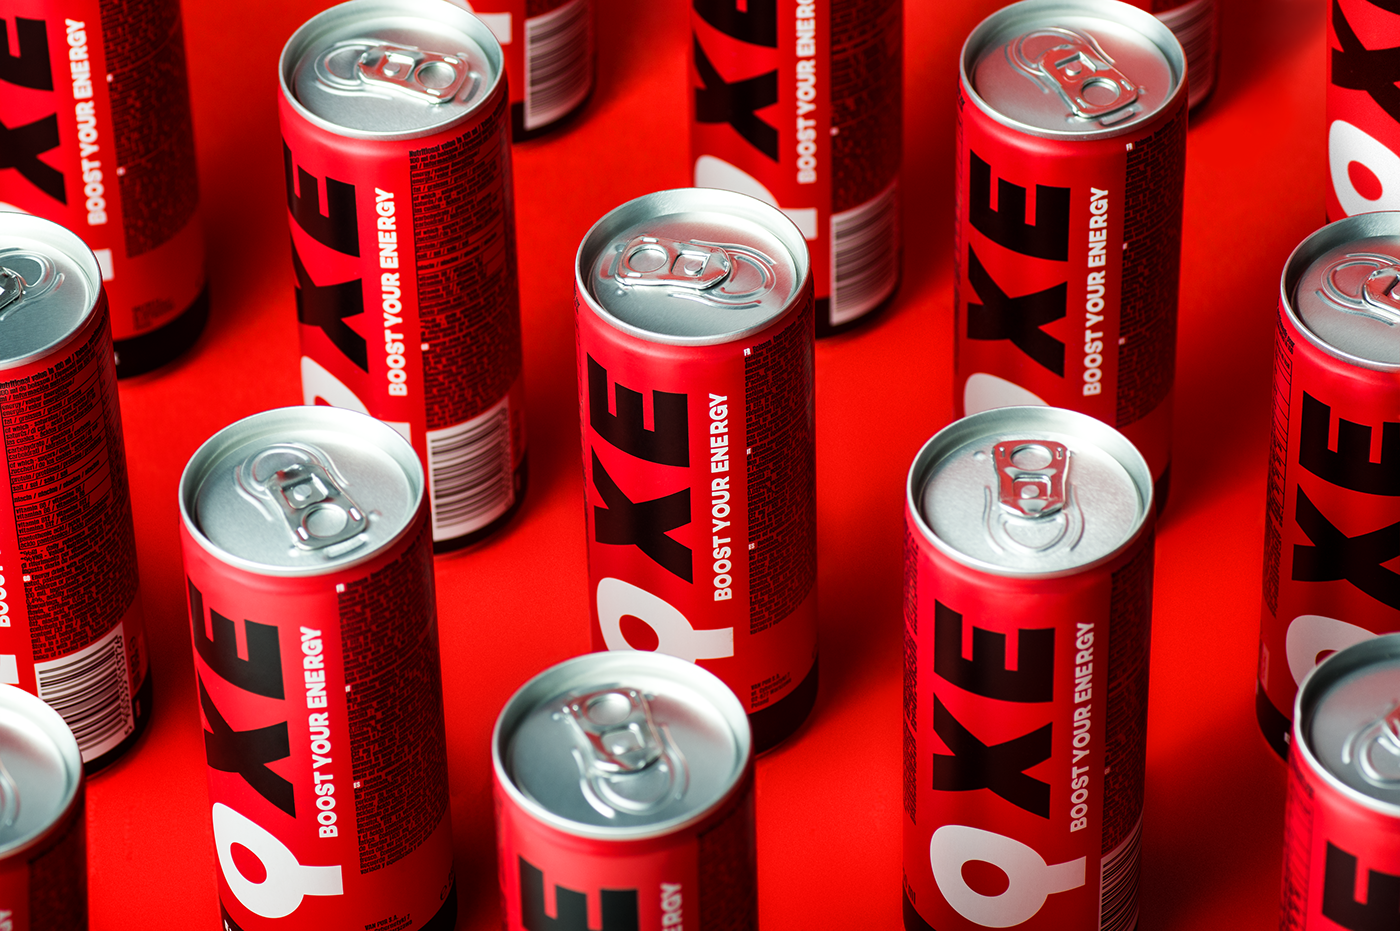 product design Packaging commercial can energydrink brand drink beverage